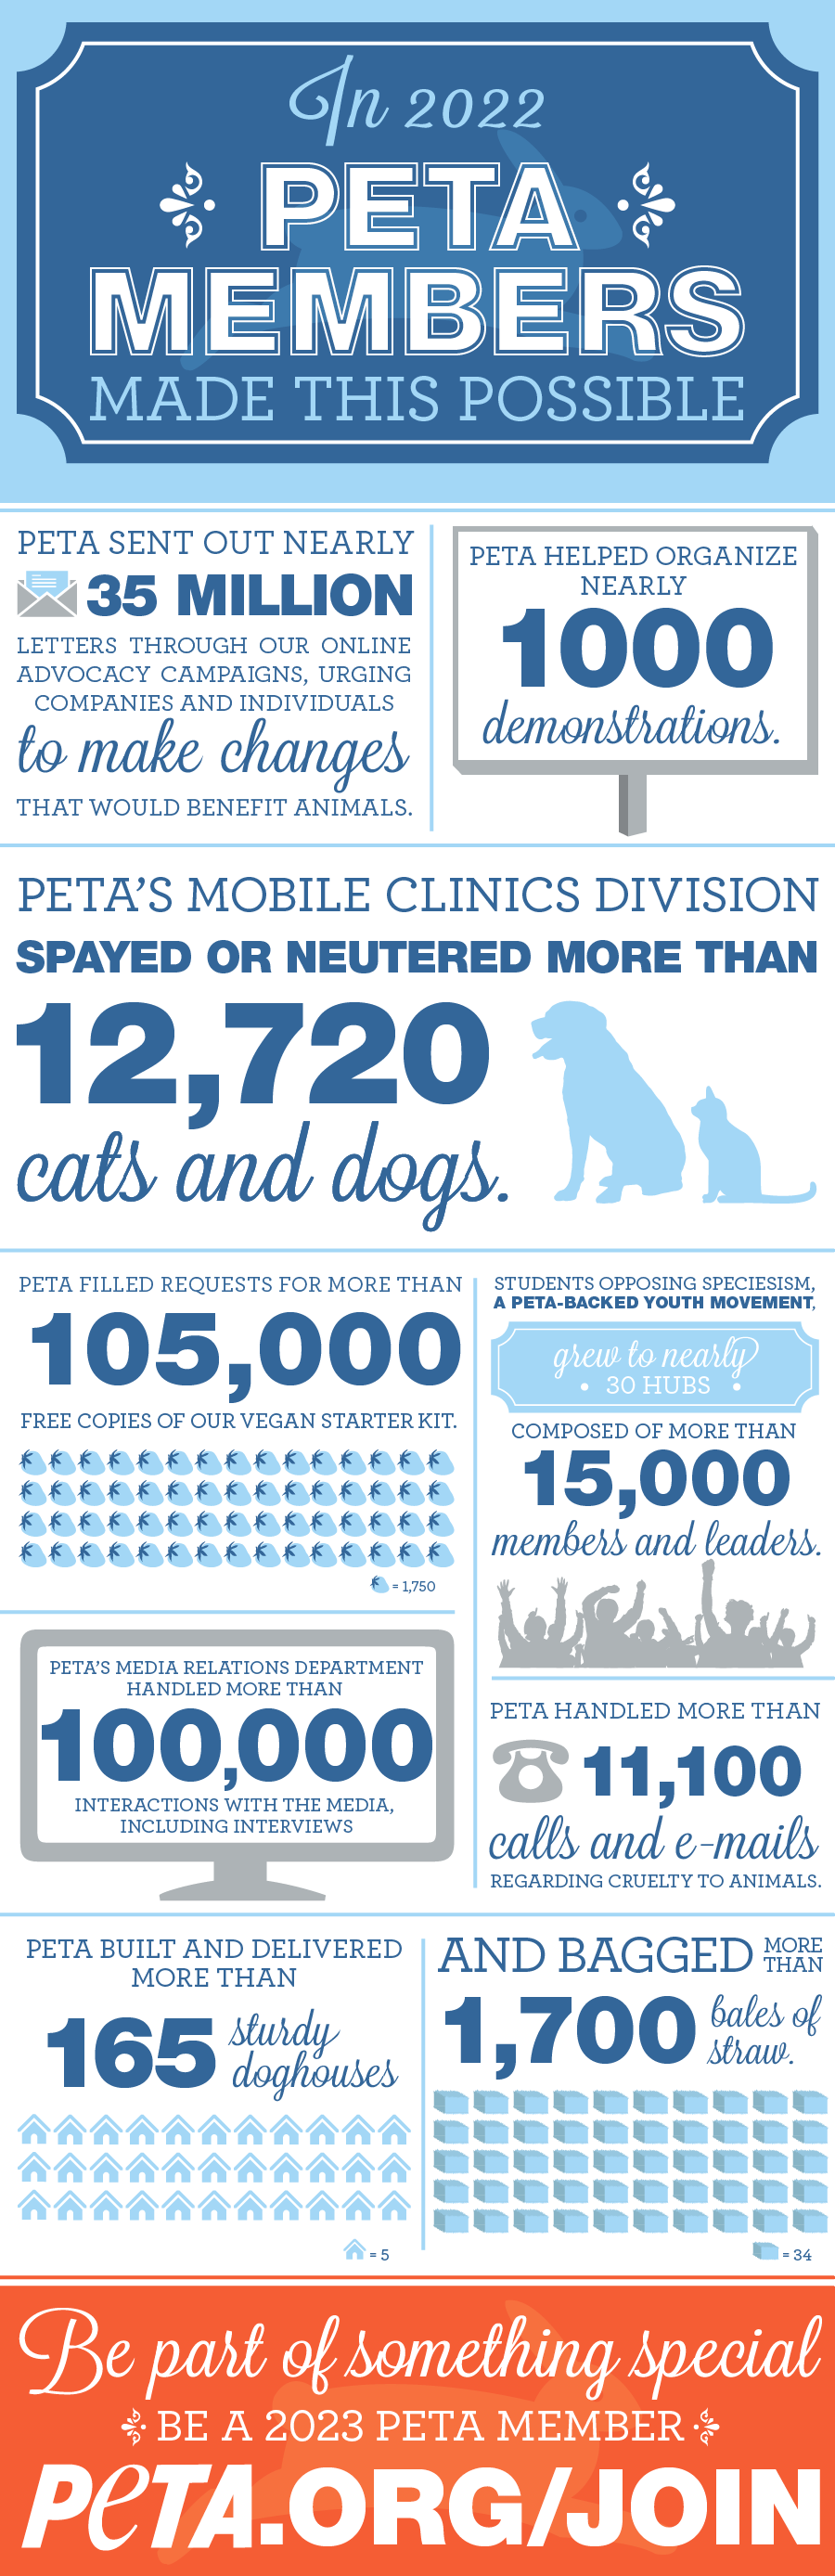 PETA's 2022 Year in Numbers Infographic